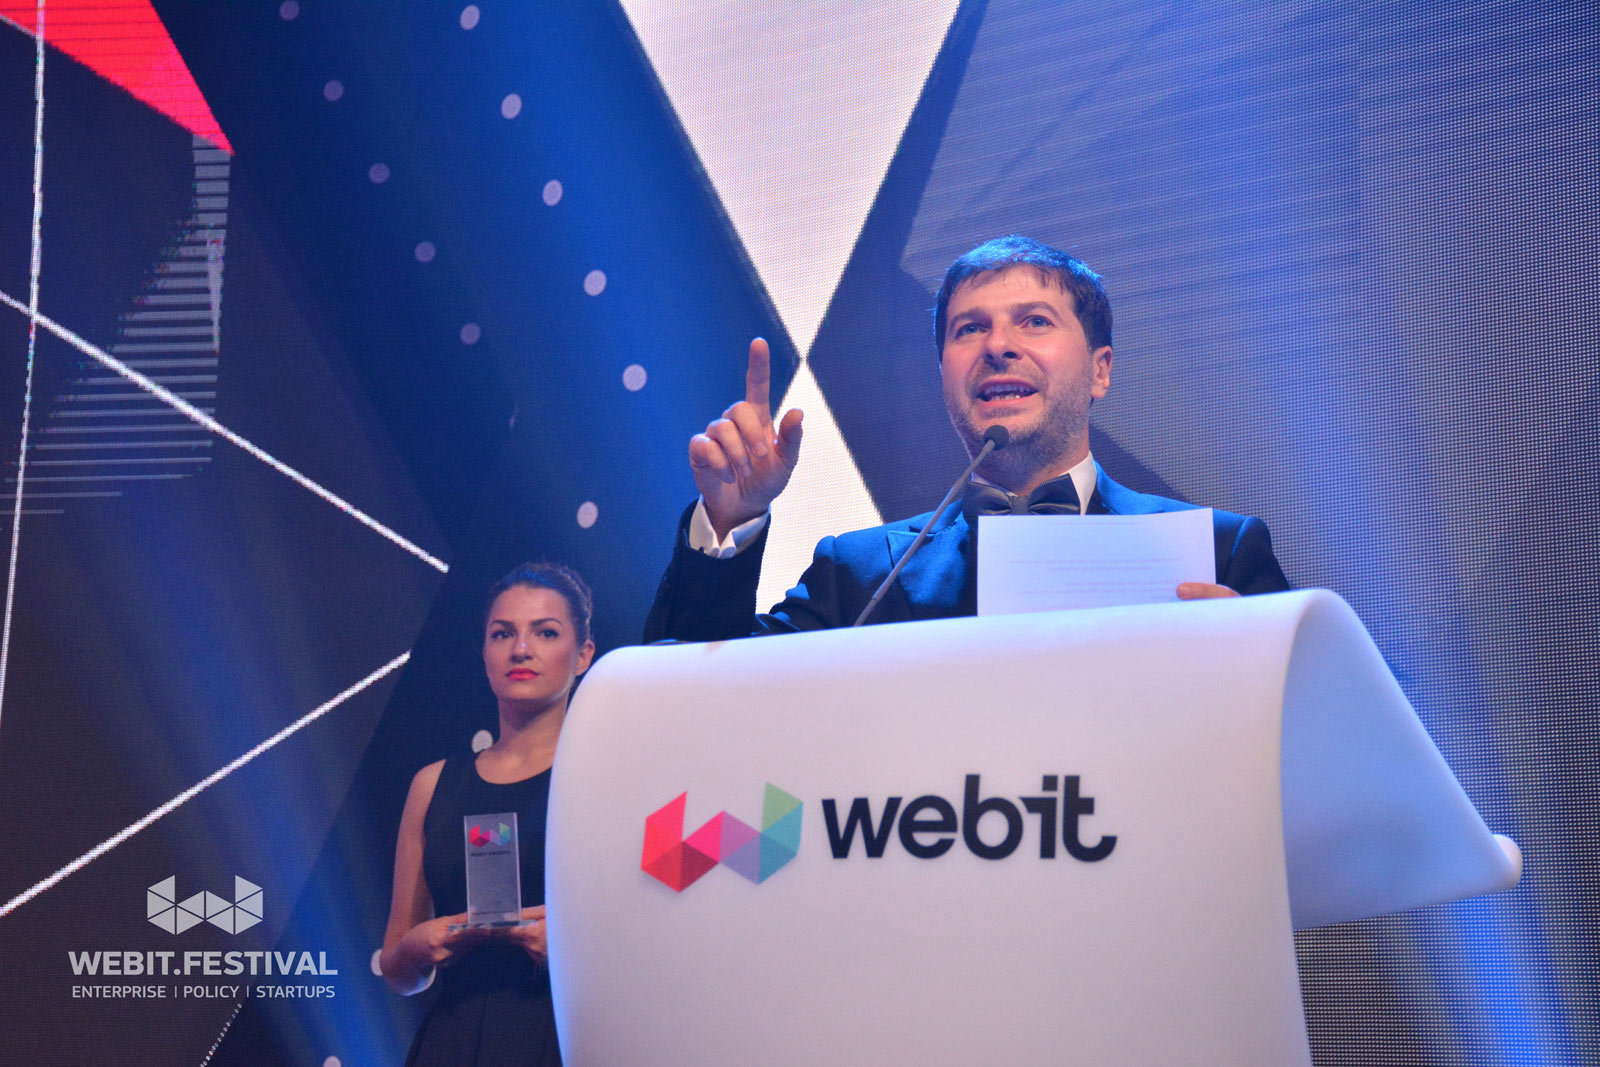 Plamen Russev presenting the award for Best Smart City Mobility Solution during the Webit Awards official ceremony and dinner